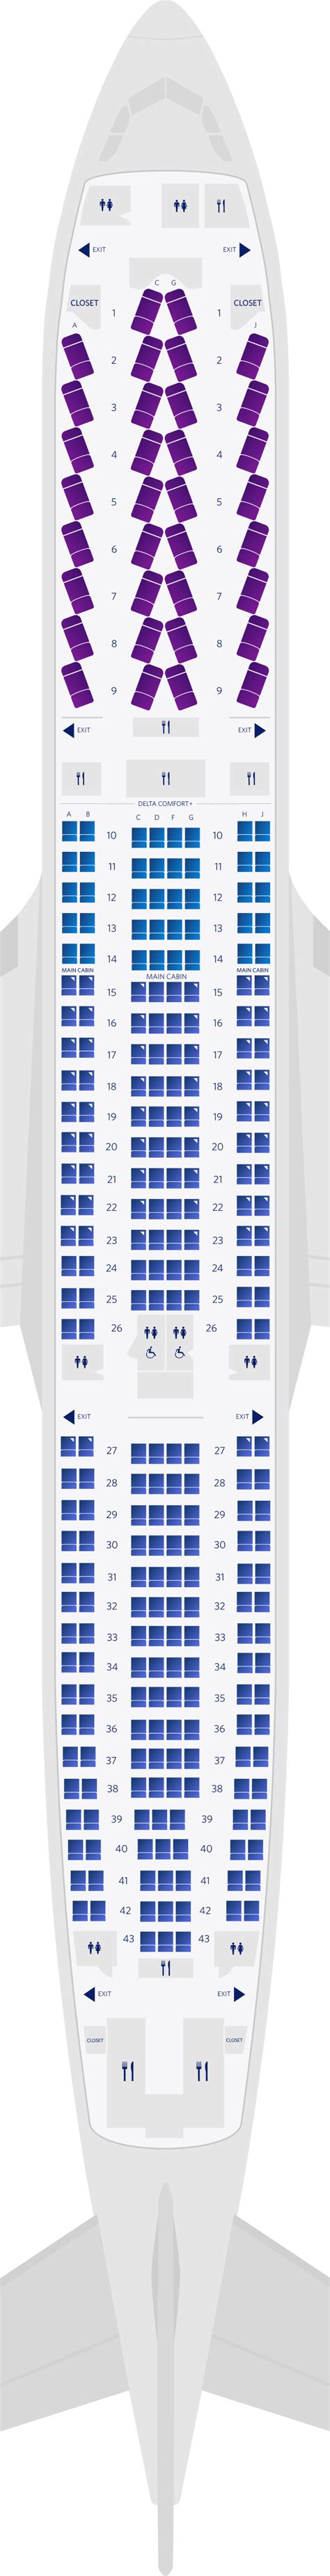 Delta Airbus A330 Seat Map Updated Find The Best Seat Seatmaps Lupon